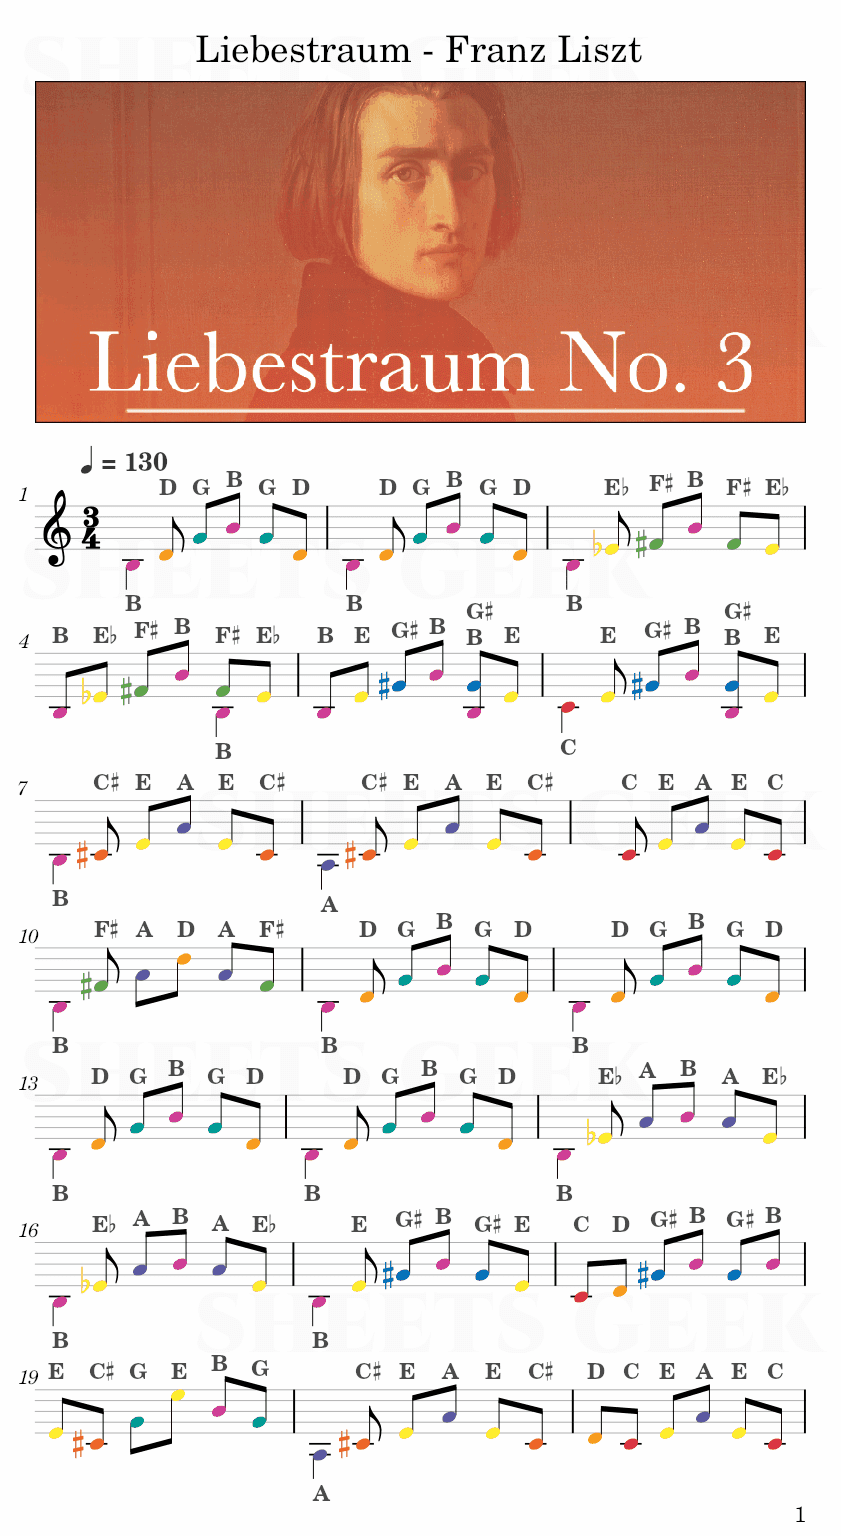 Liebestraum - Franz Liszt Easy Sheet Music Free for piano, keyboard, flute, violin, sax, cello page 1